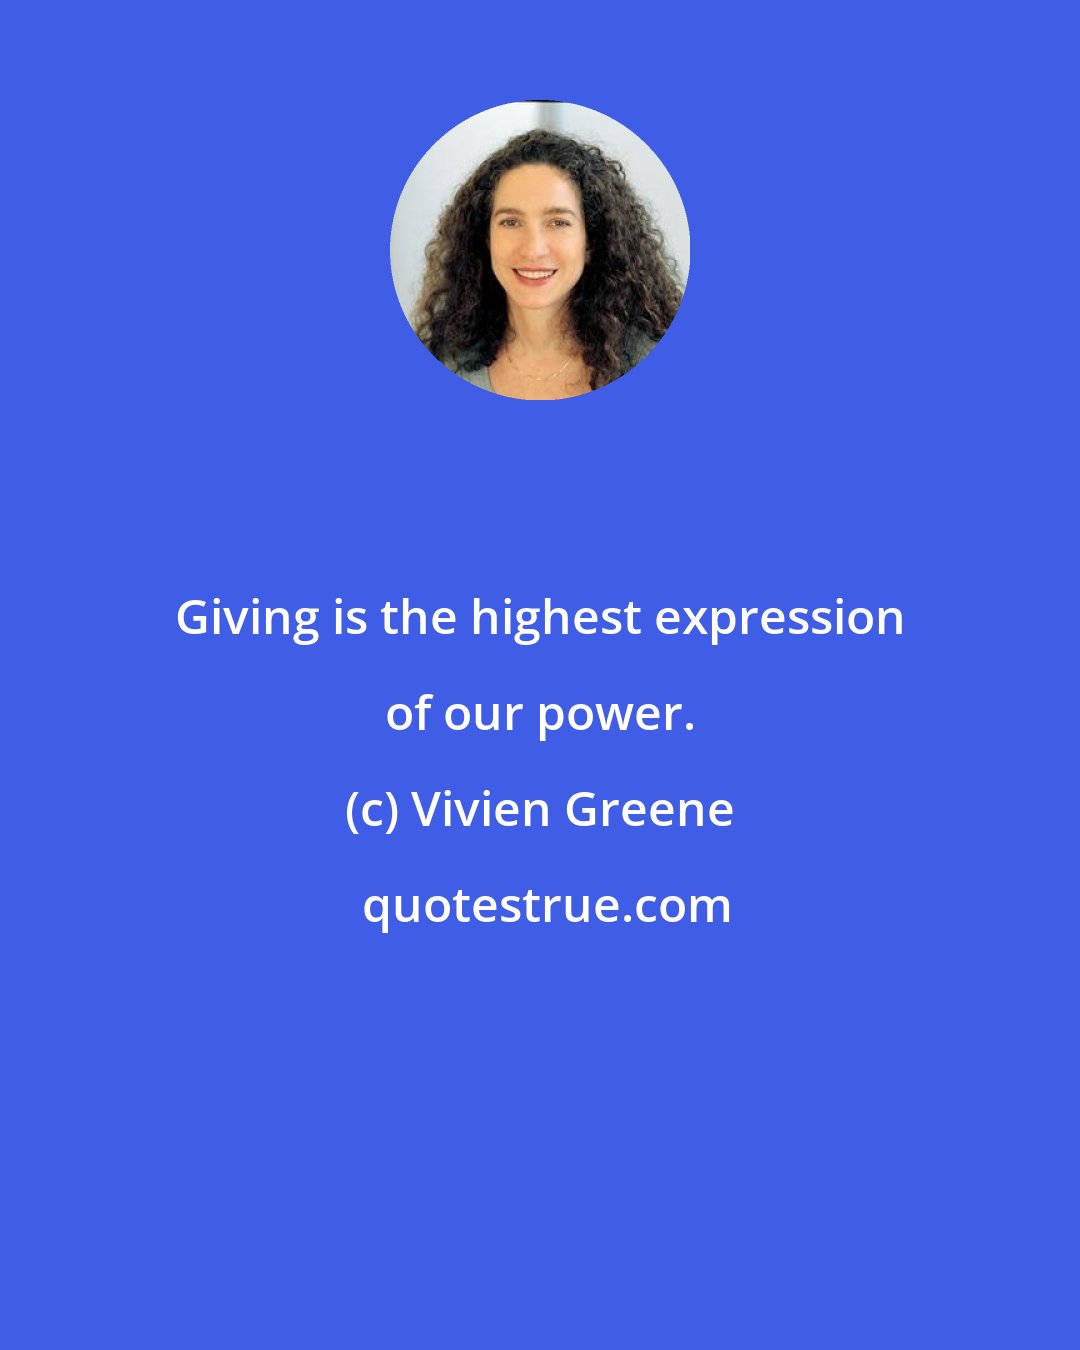 Vivien Greene: Giving is the highest expression of our power.